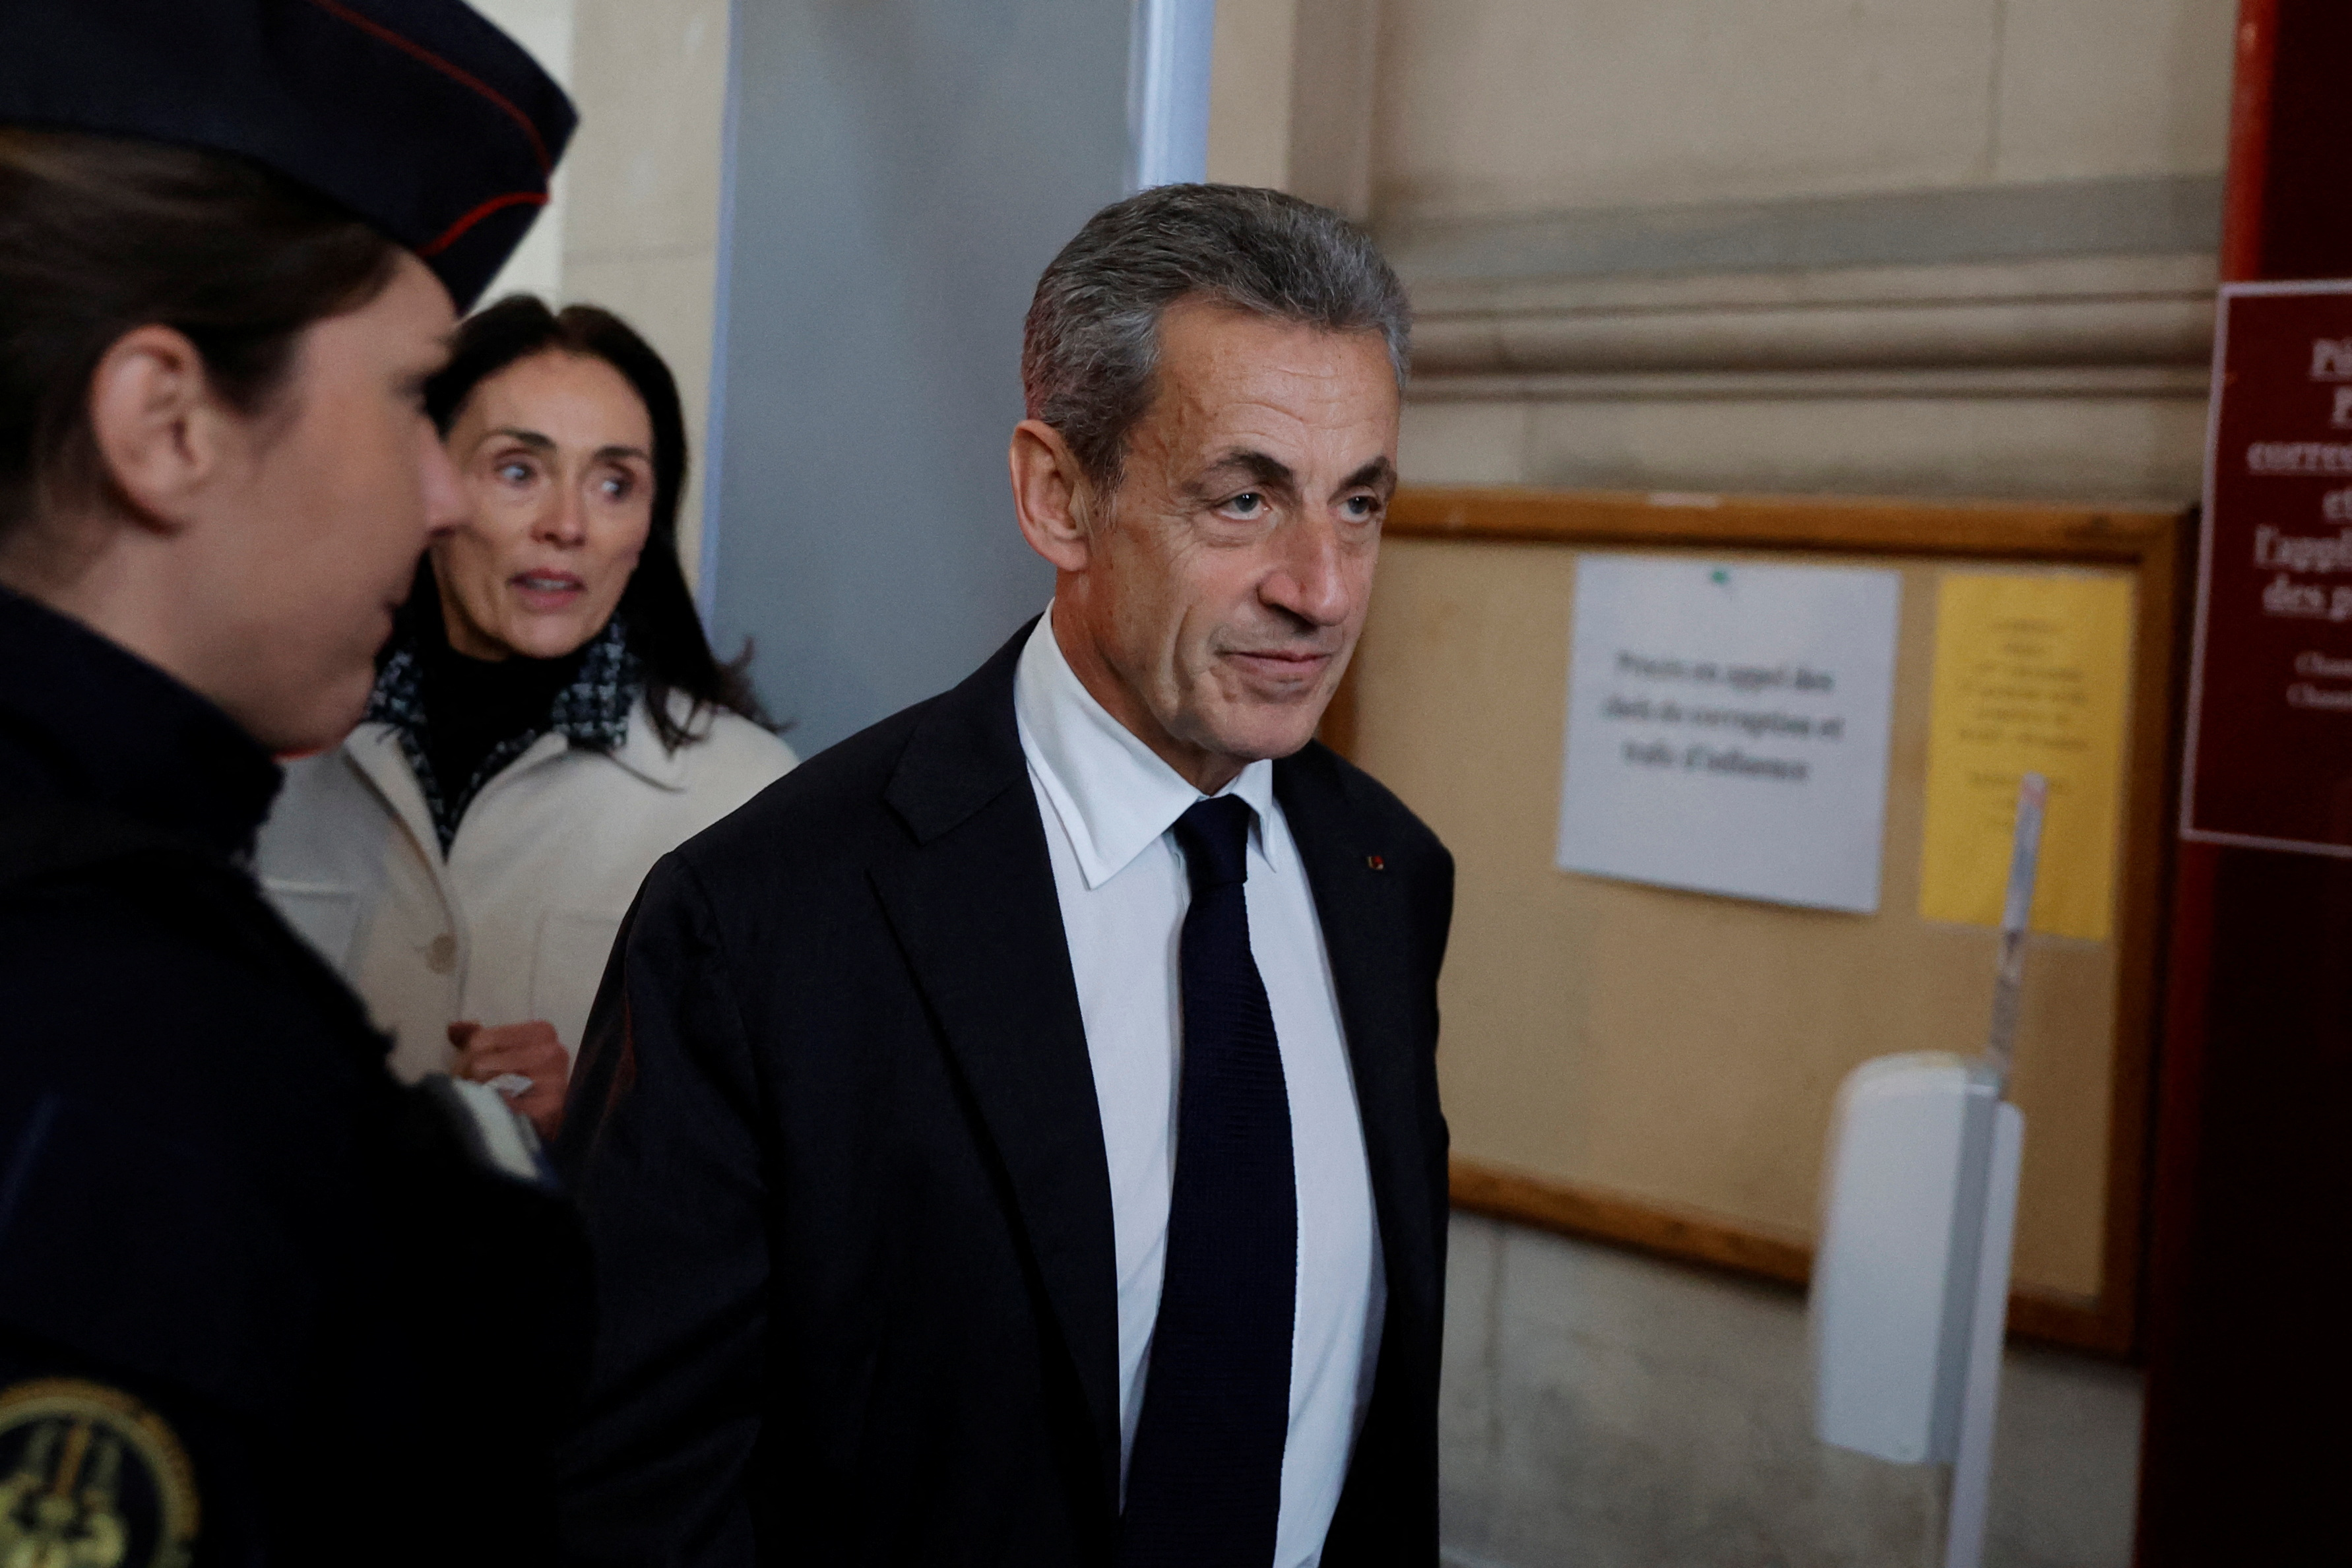 Appeal trial of former French president Sarkozy on corruption charges starts at Paris court